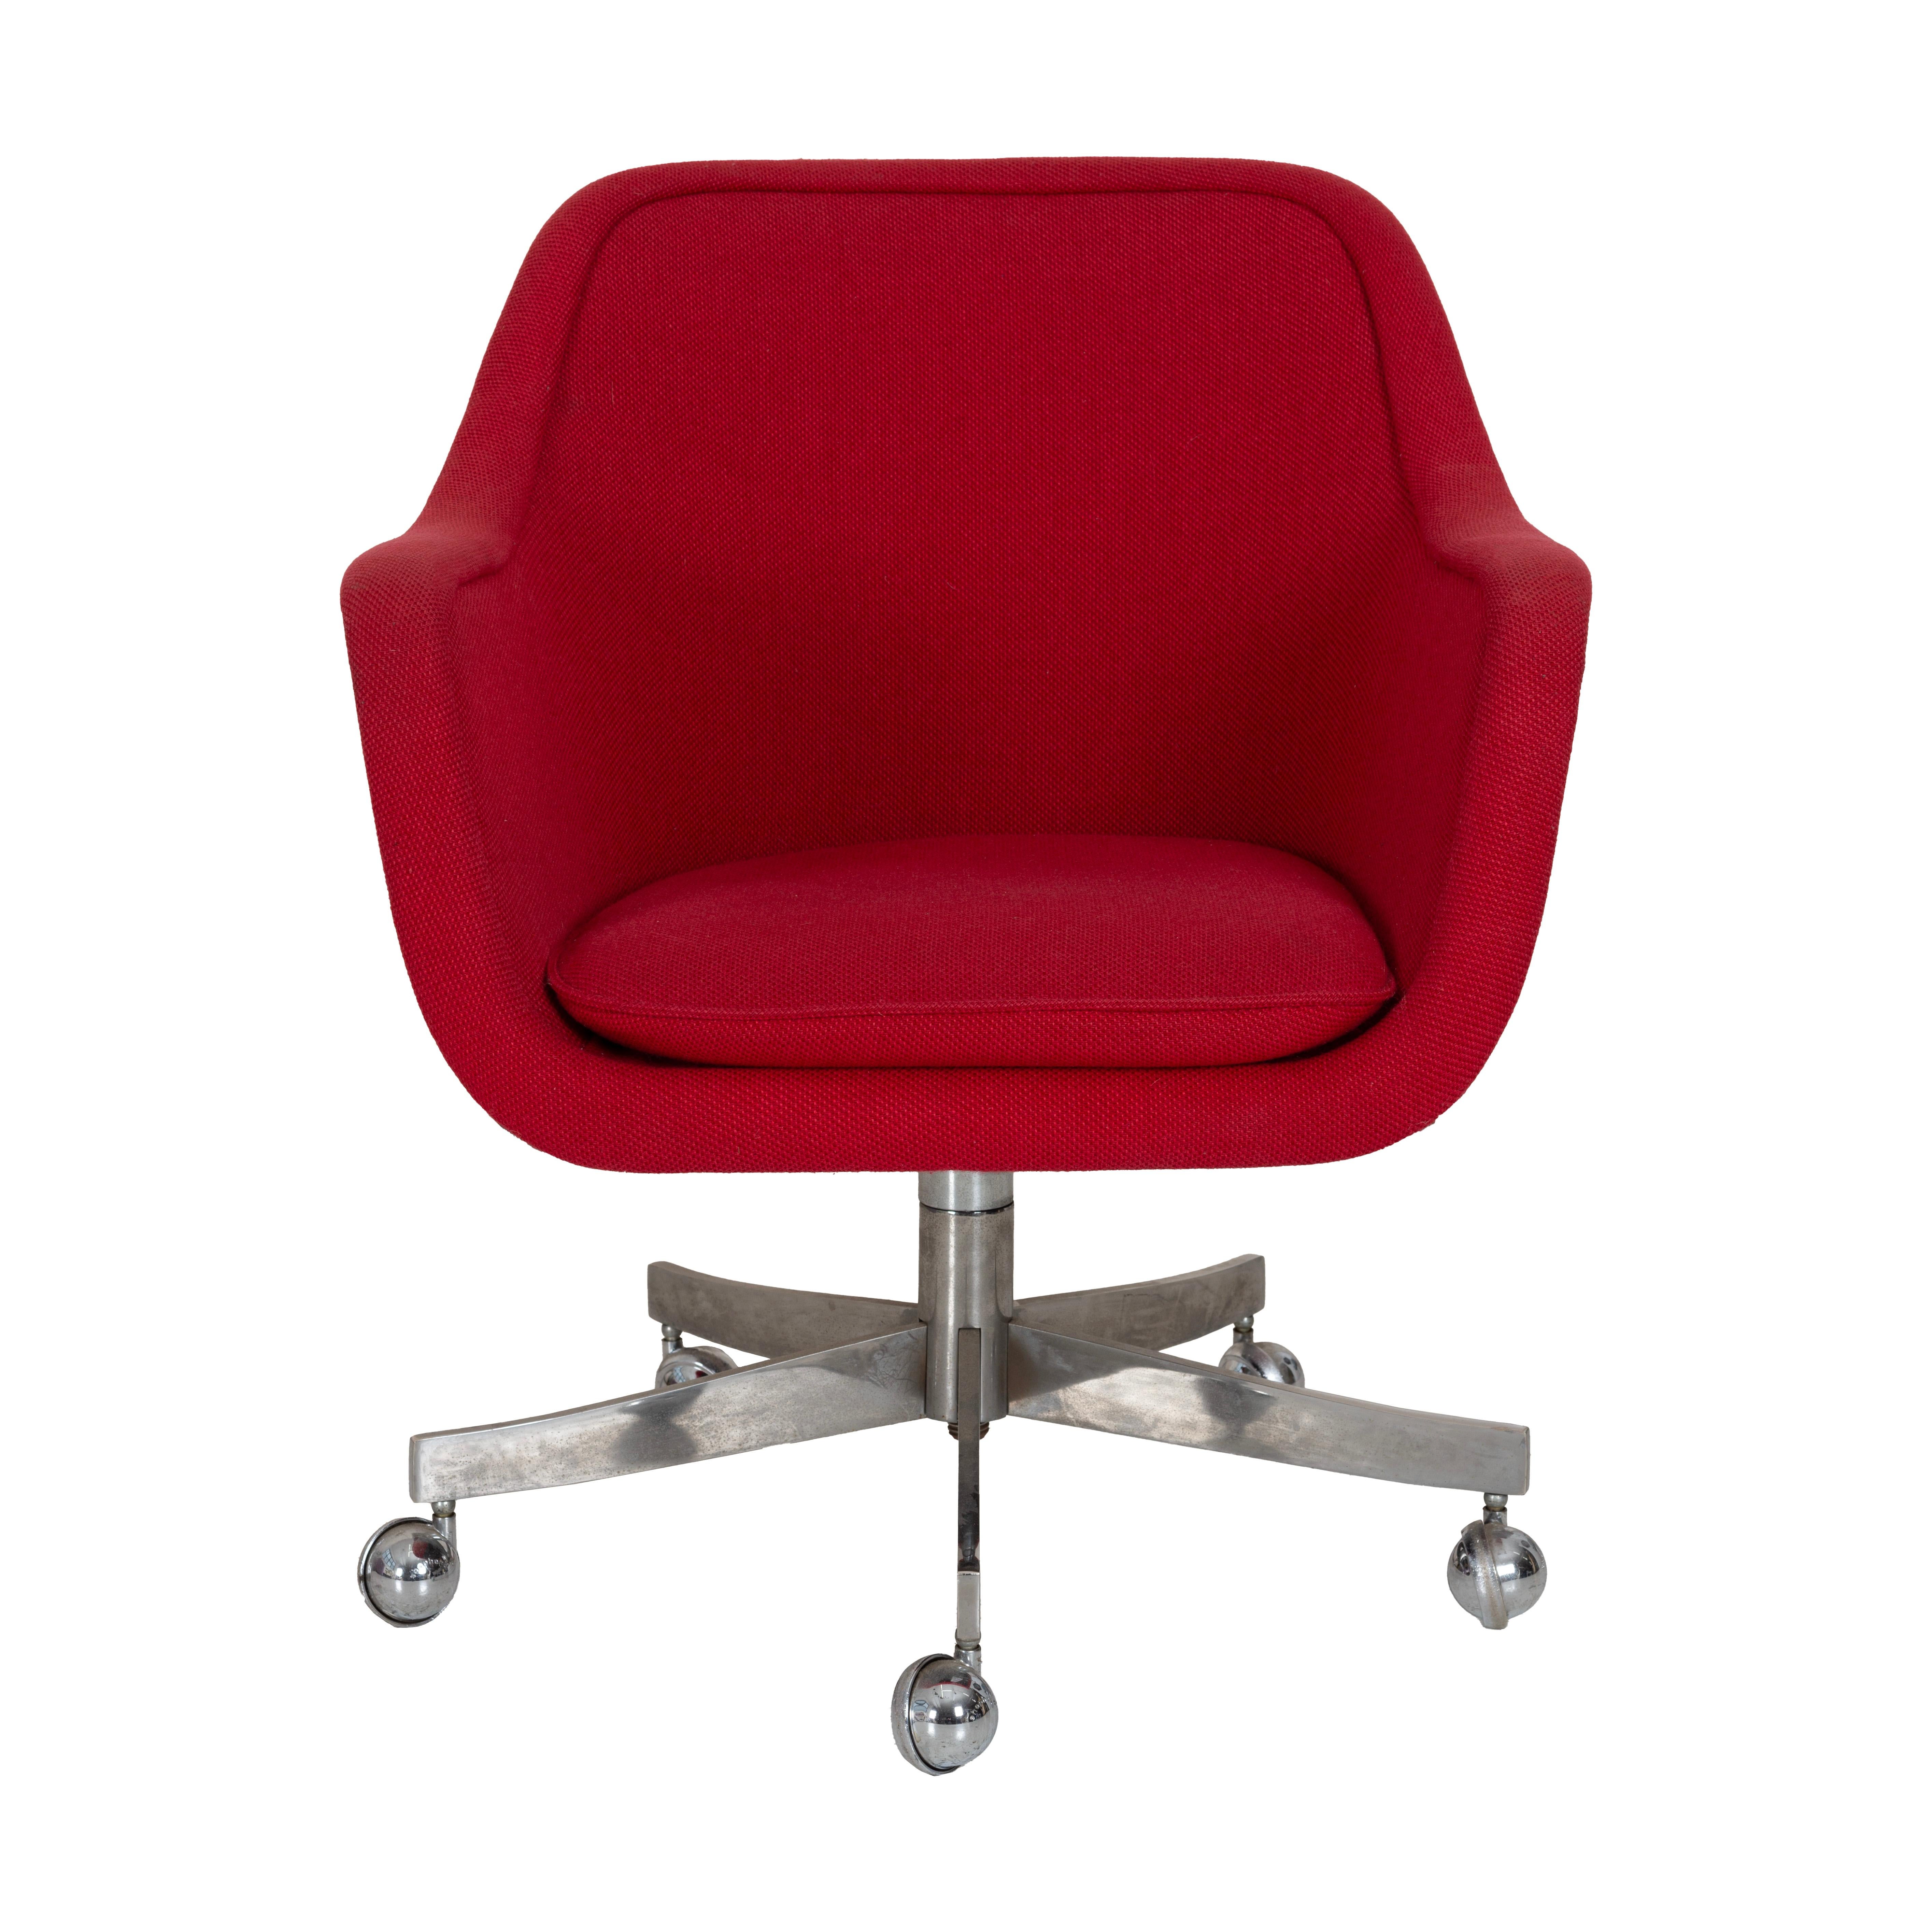 Ward Bennett Desk Chair.  Upholstered in original red cotton weave fabric. Chair tilts and swivels with adjustable height.  Dimensions provided are as follows for its lowest position. it can raise up to 3